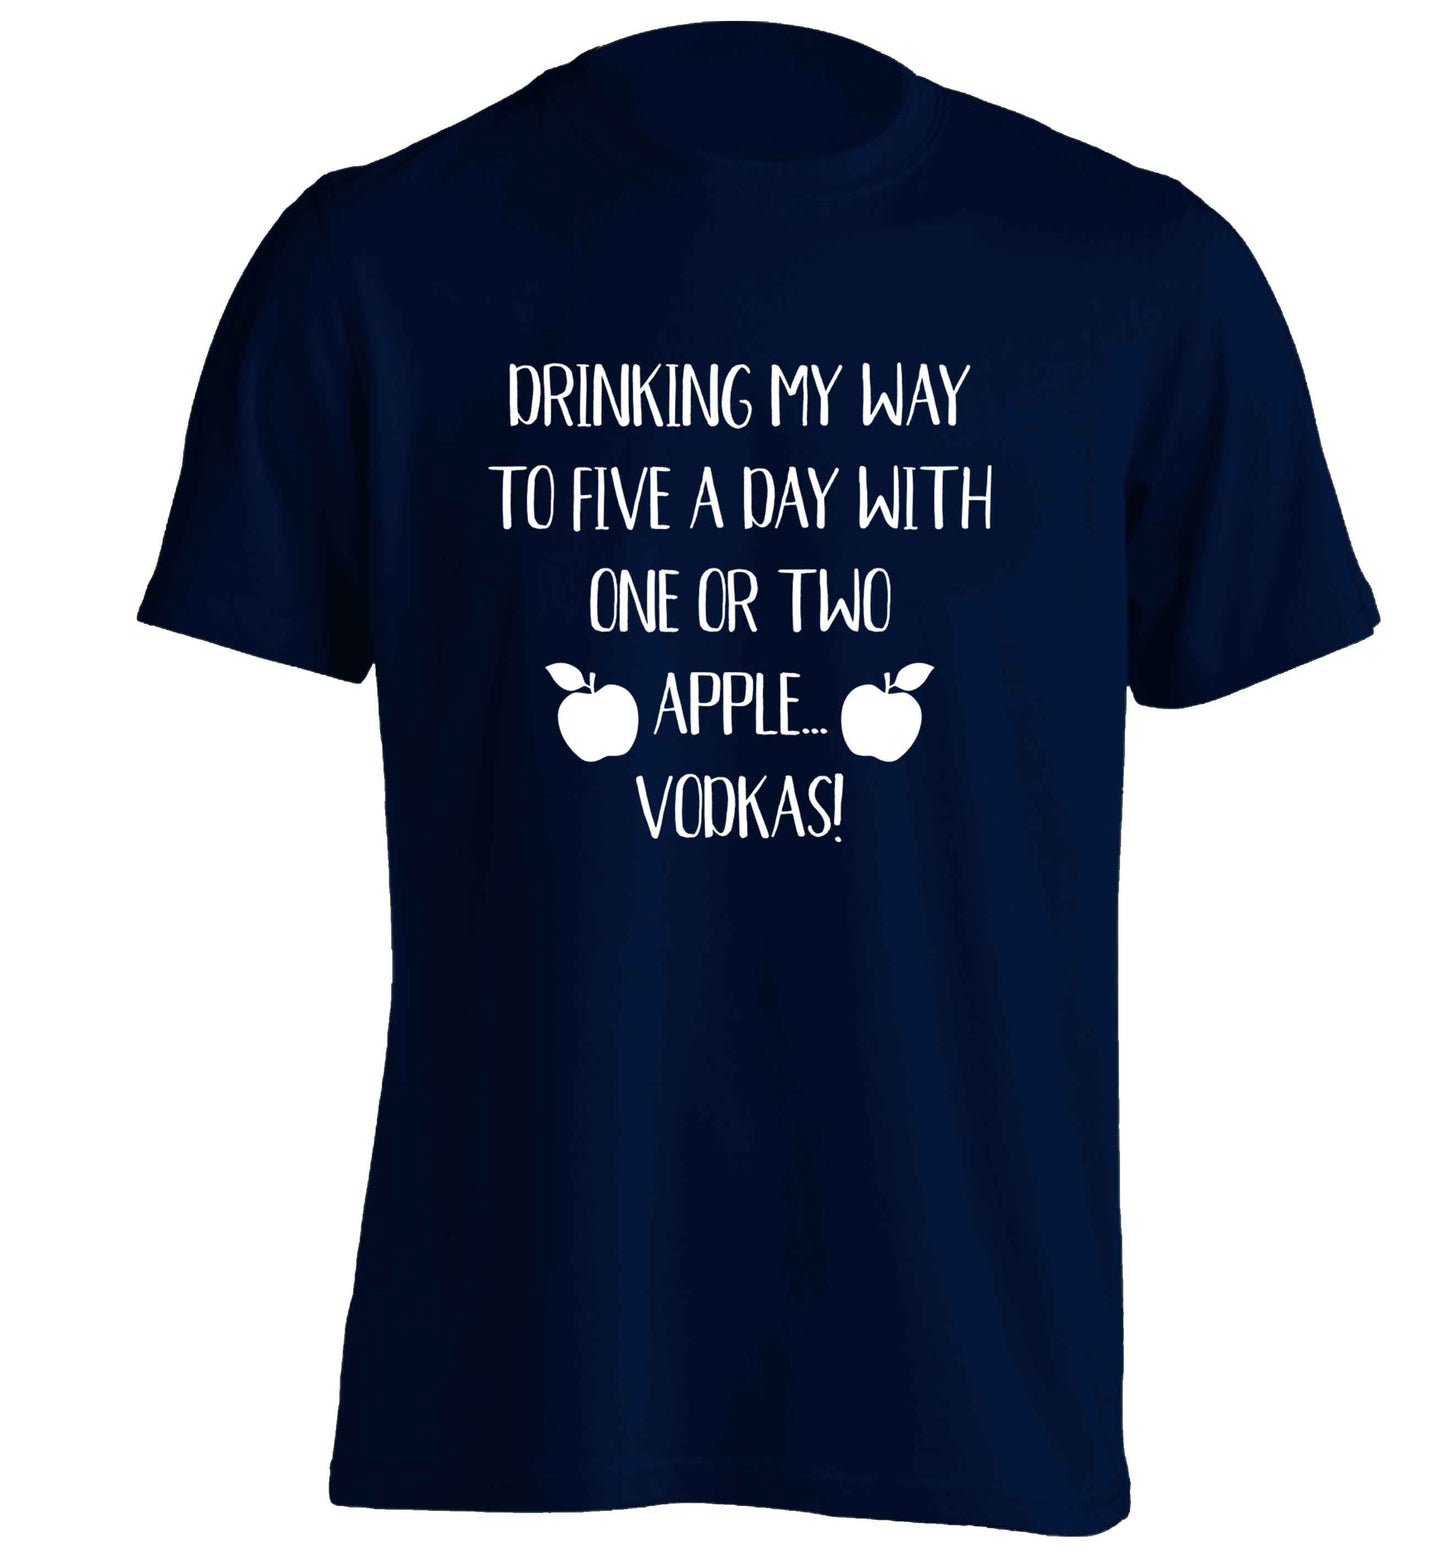 Drinking my way to five a day with one or two apple vodkas adults unisex navy Tshirt 2XL